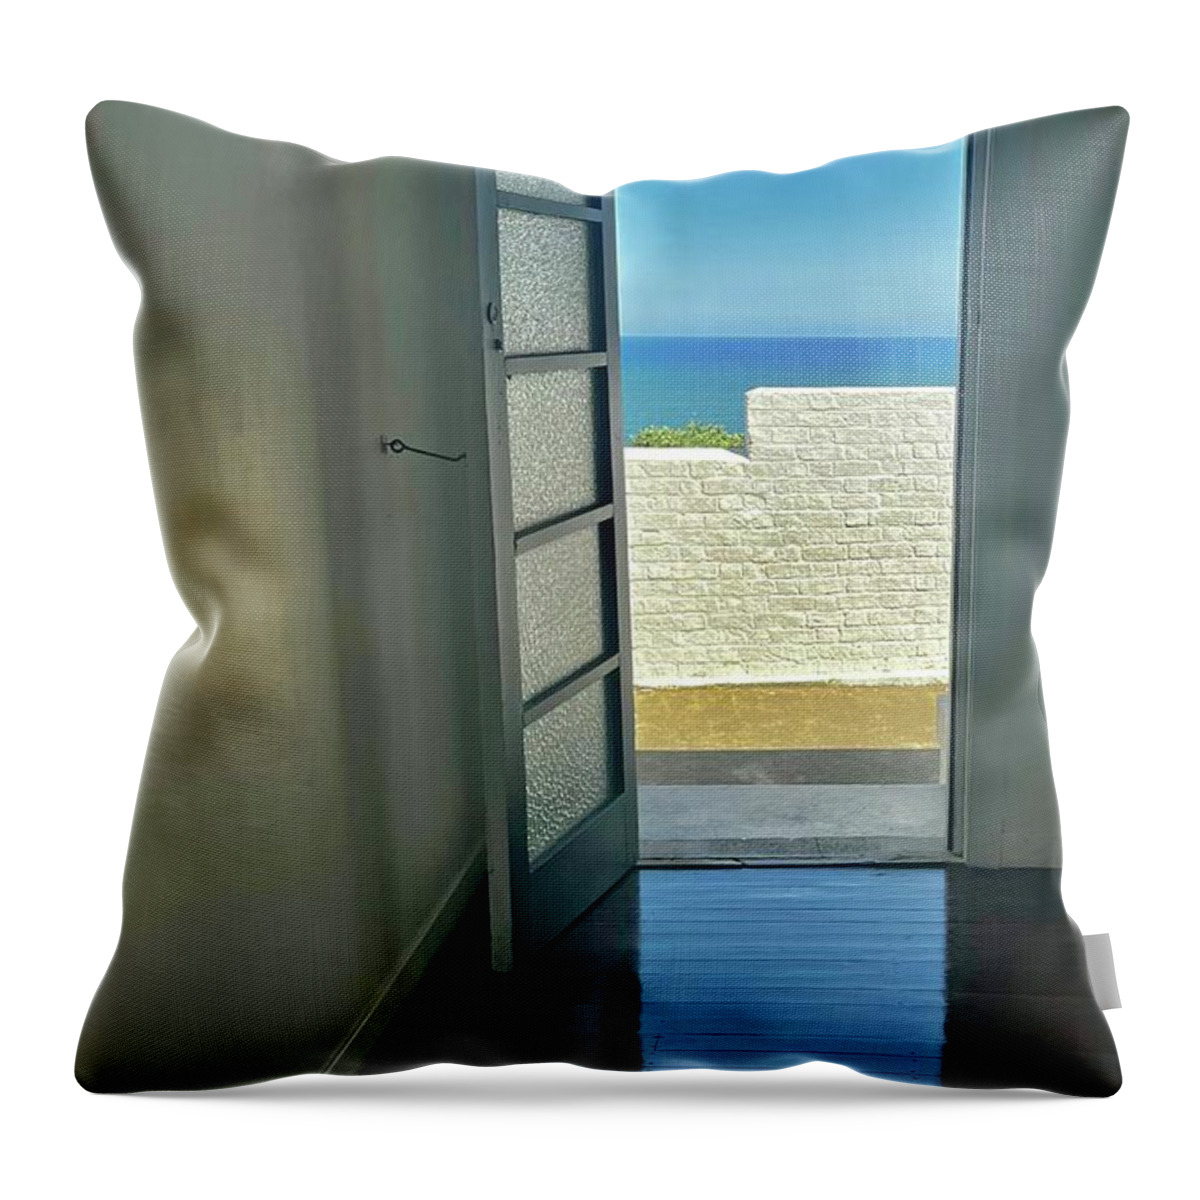 Dreaming Throw Pillow featuring the photograph Liminal Dreaming by Sarah Lilja